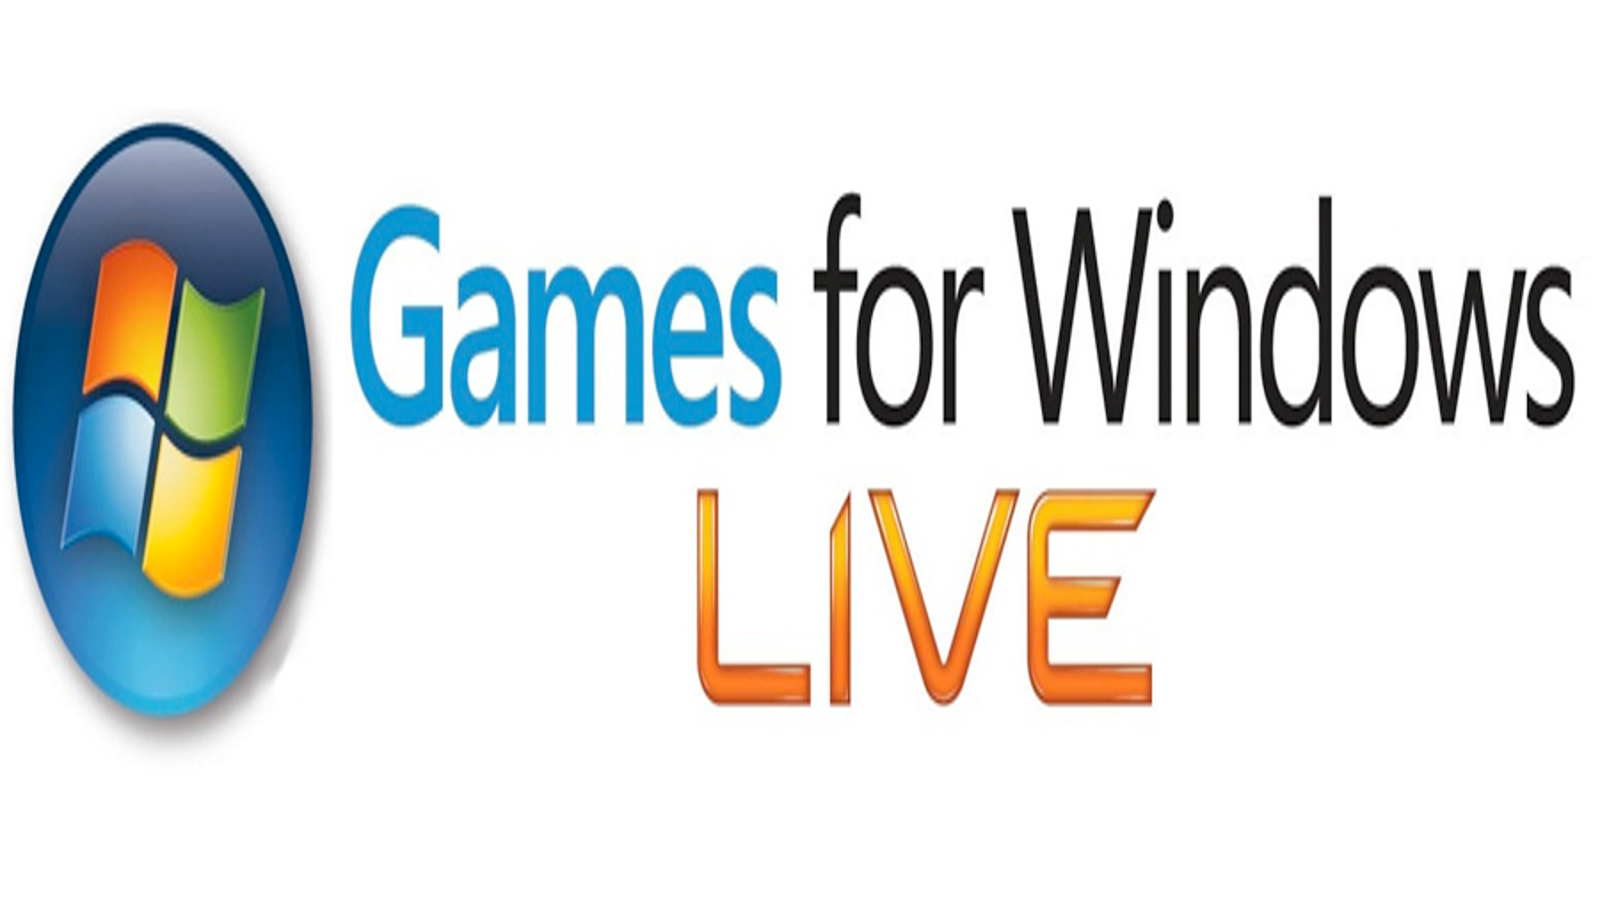 New Games for Windows Marketplace Launches Today!